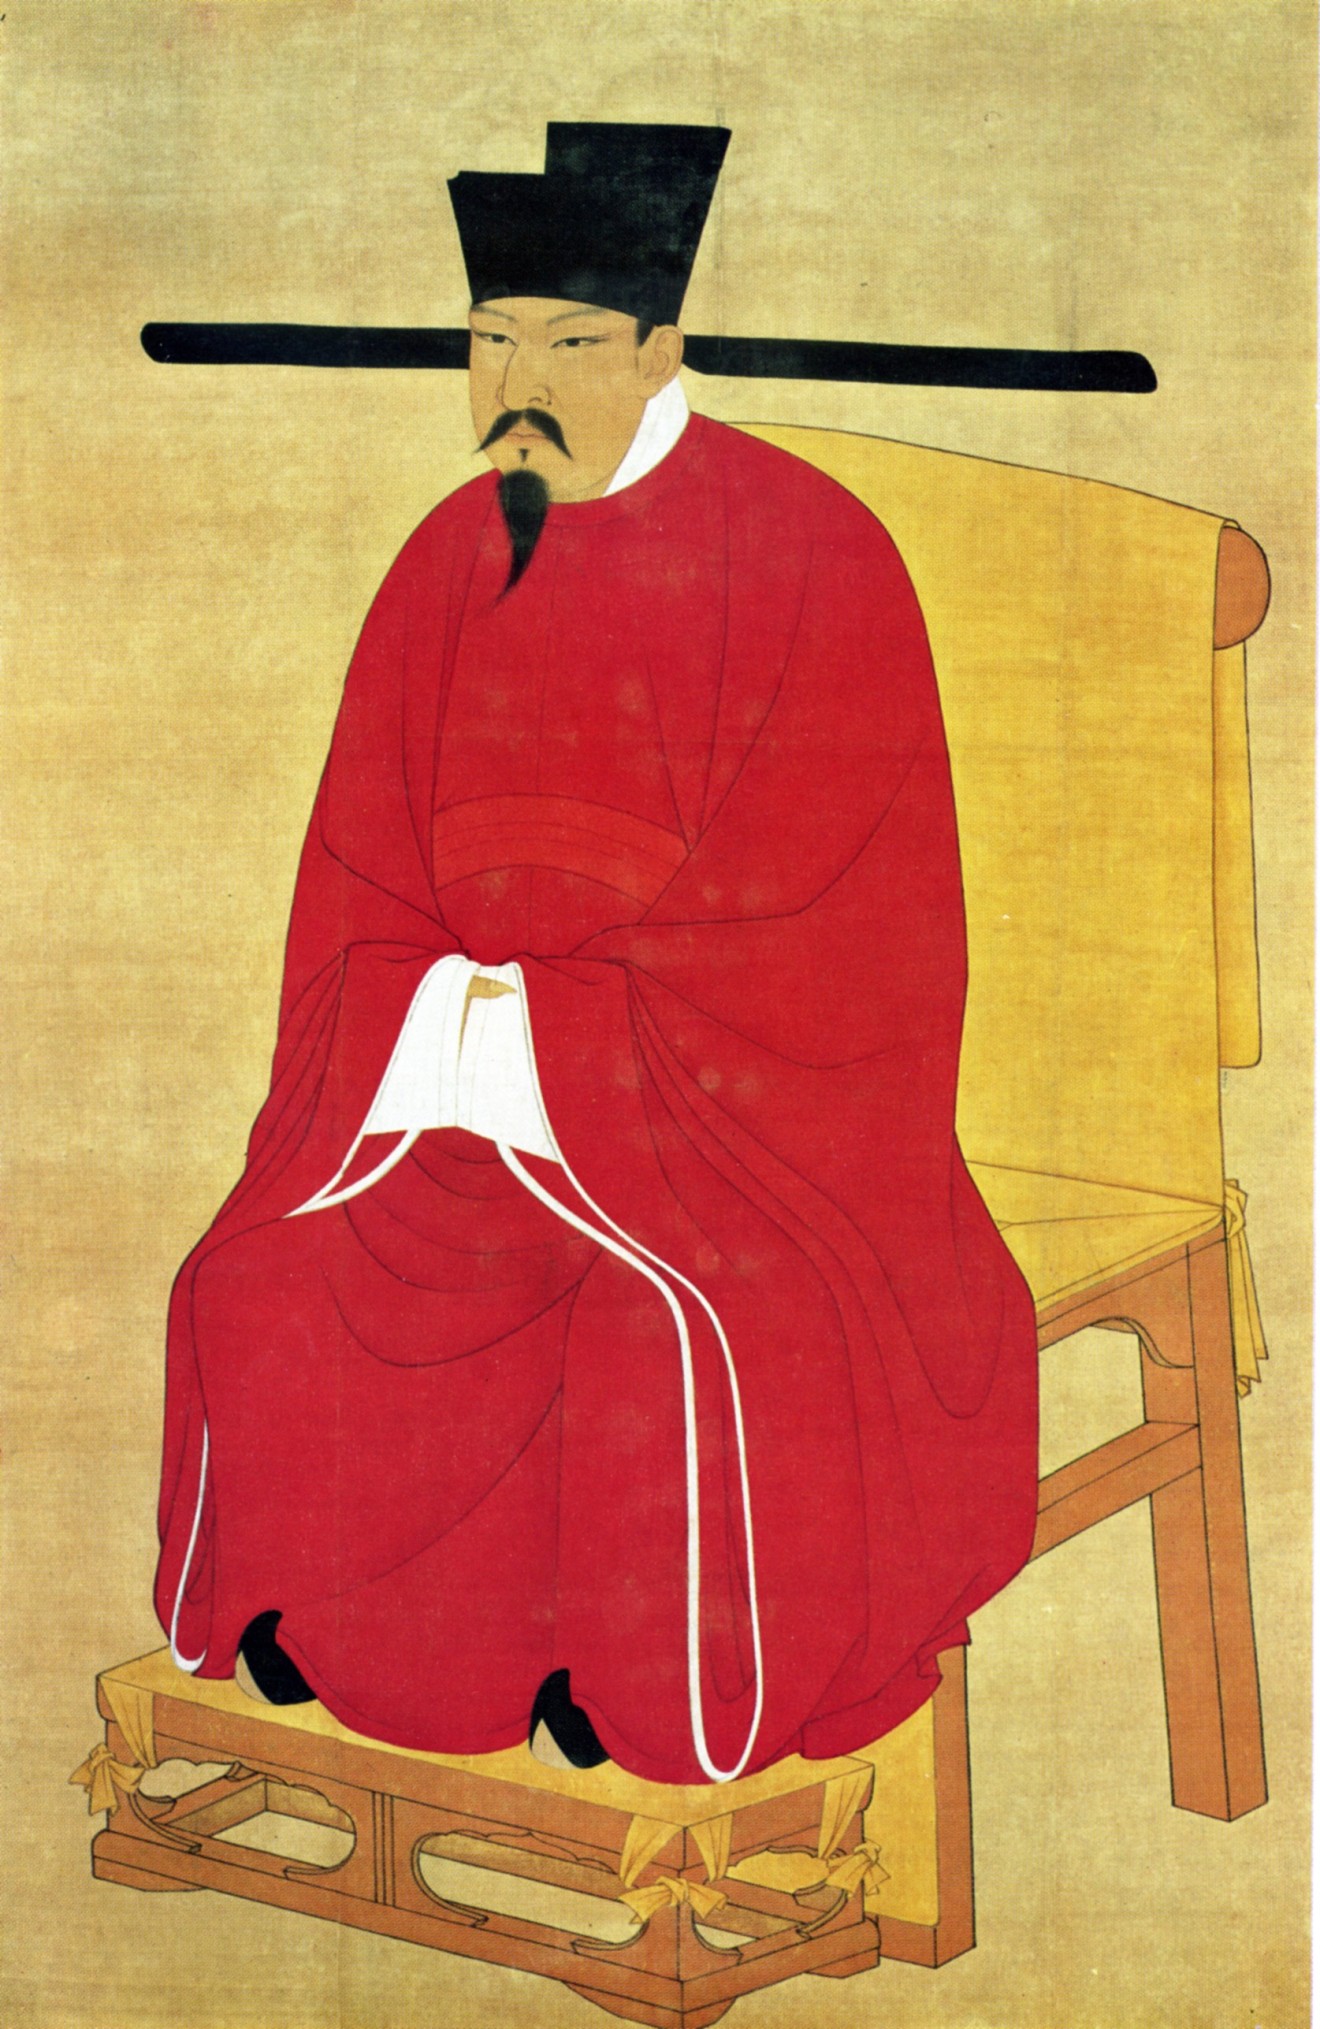 Emperor Shenzong of the Song Dynasty with the official court headwear.